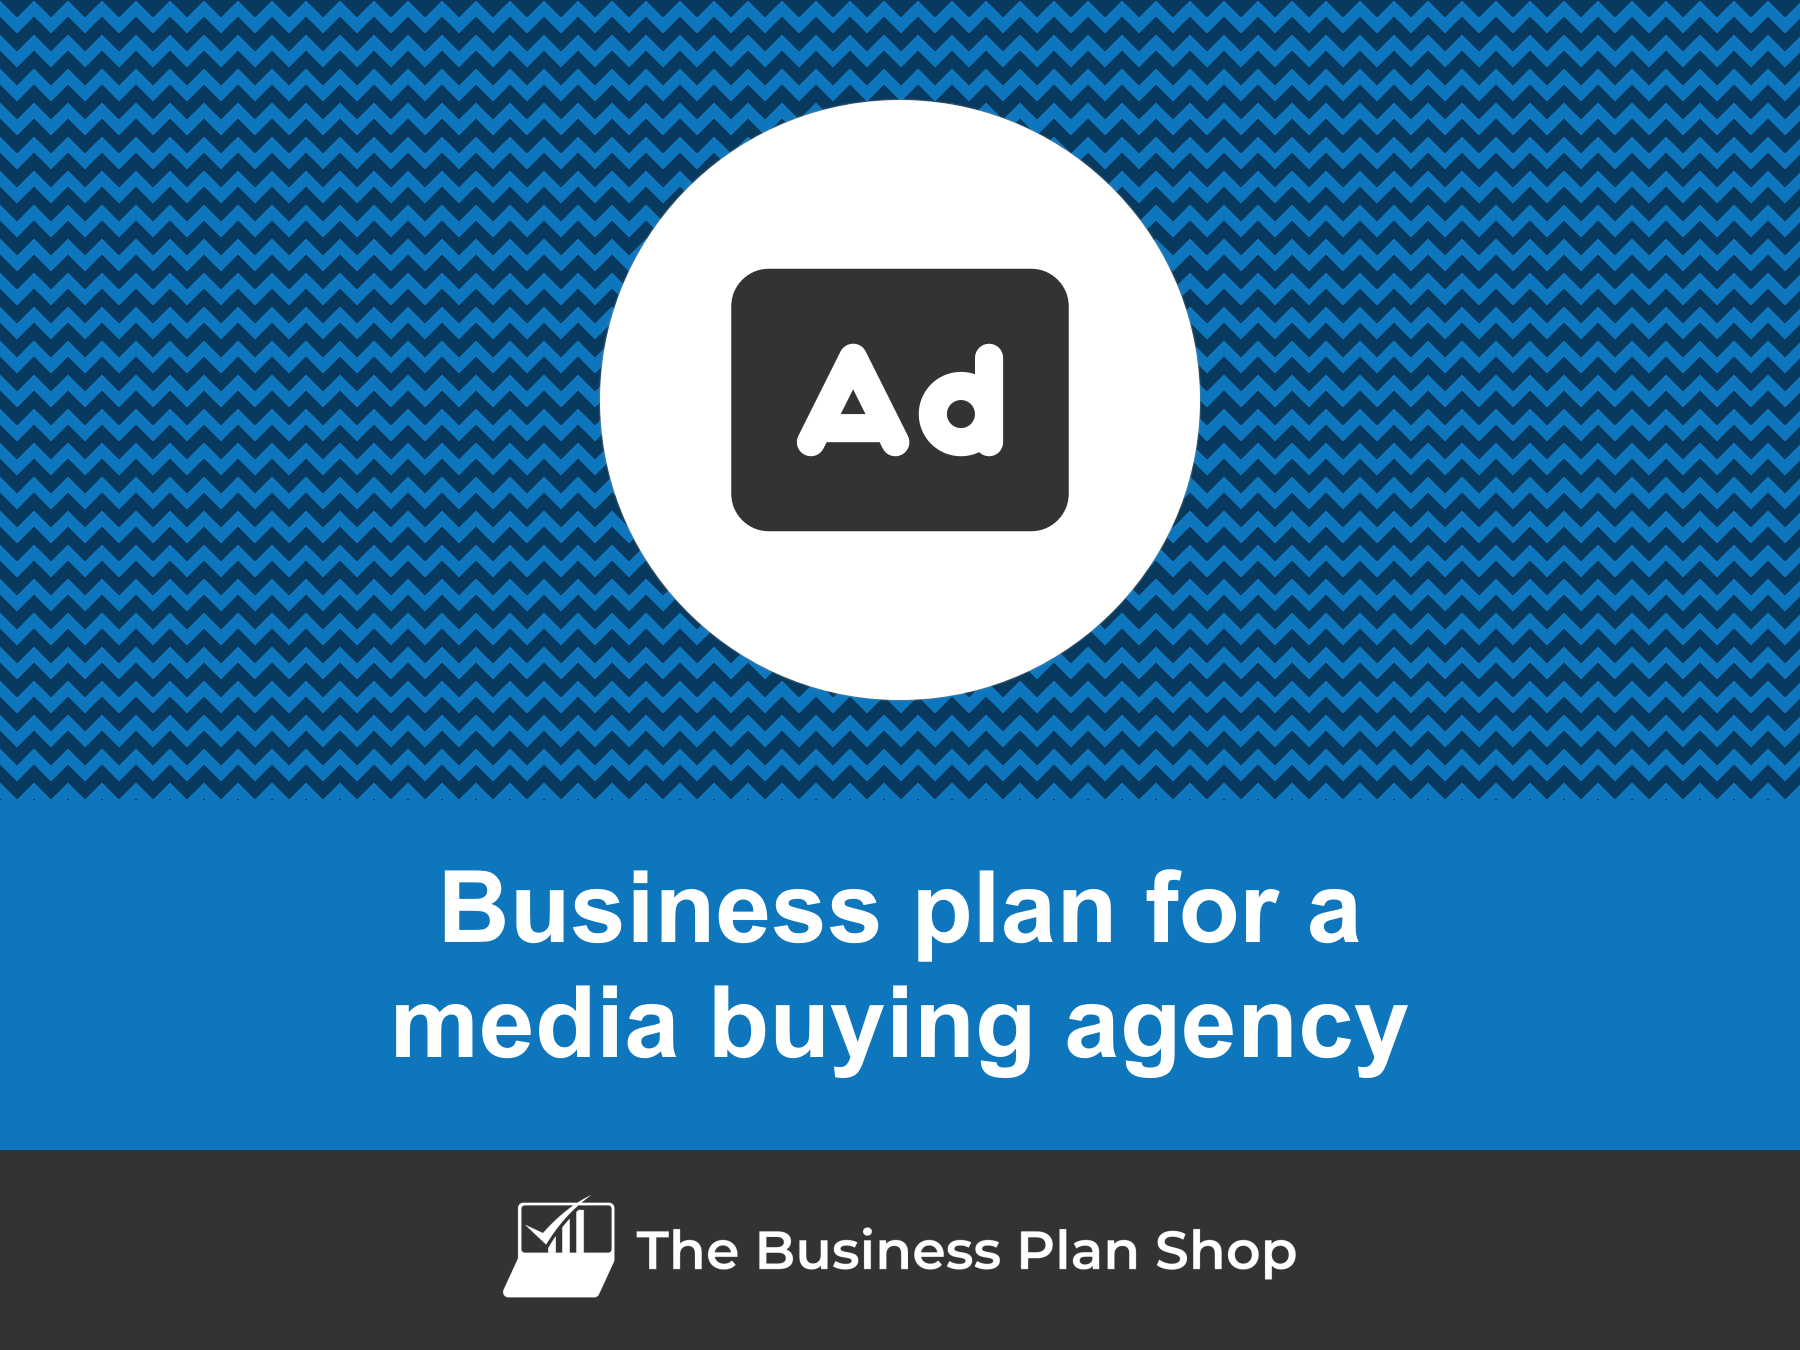 How to write a business plan for a media buying agency?